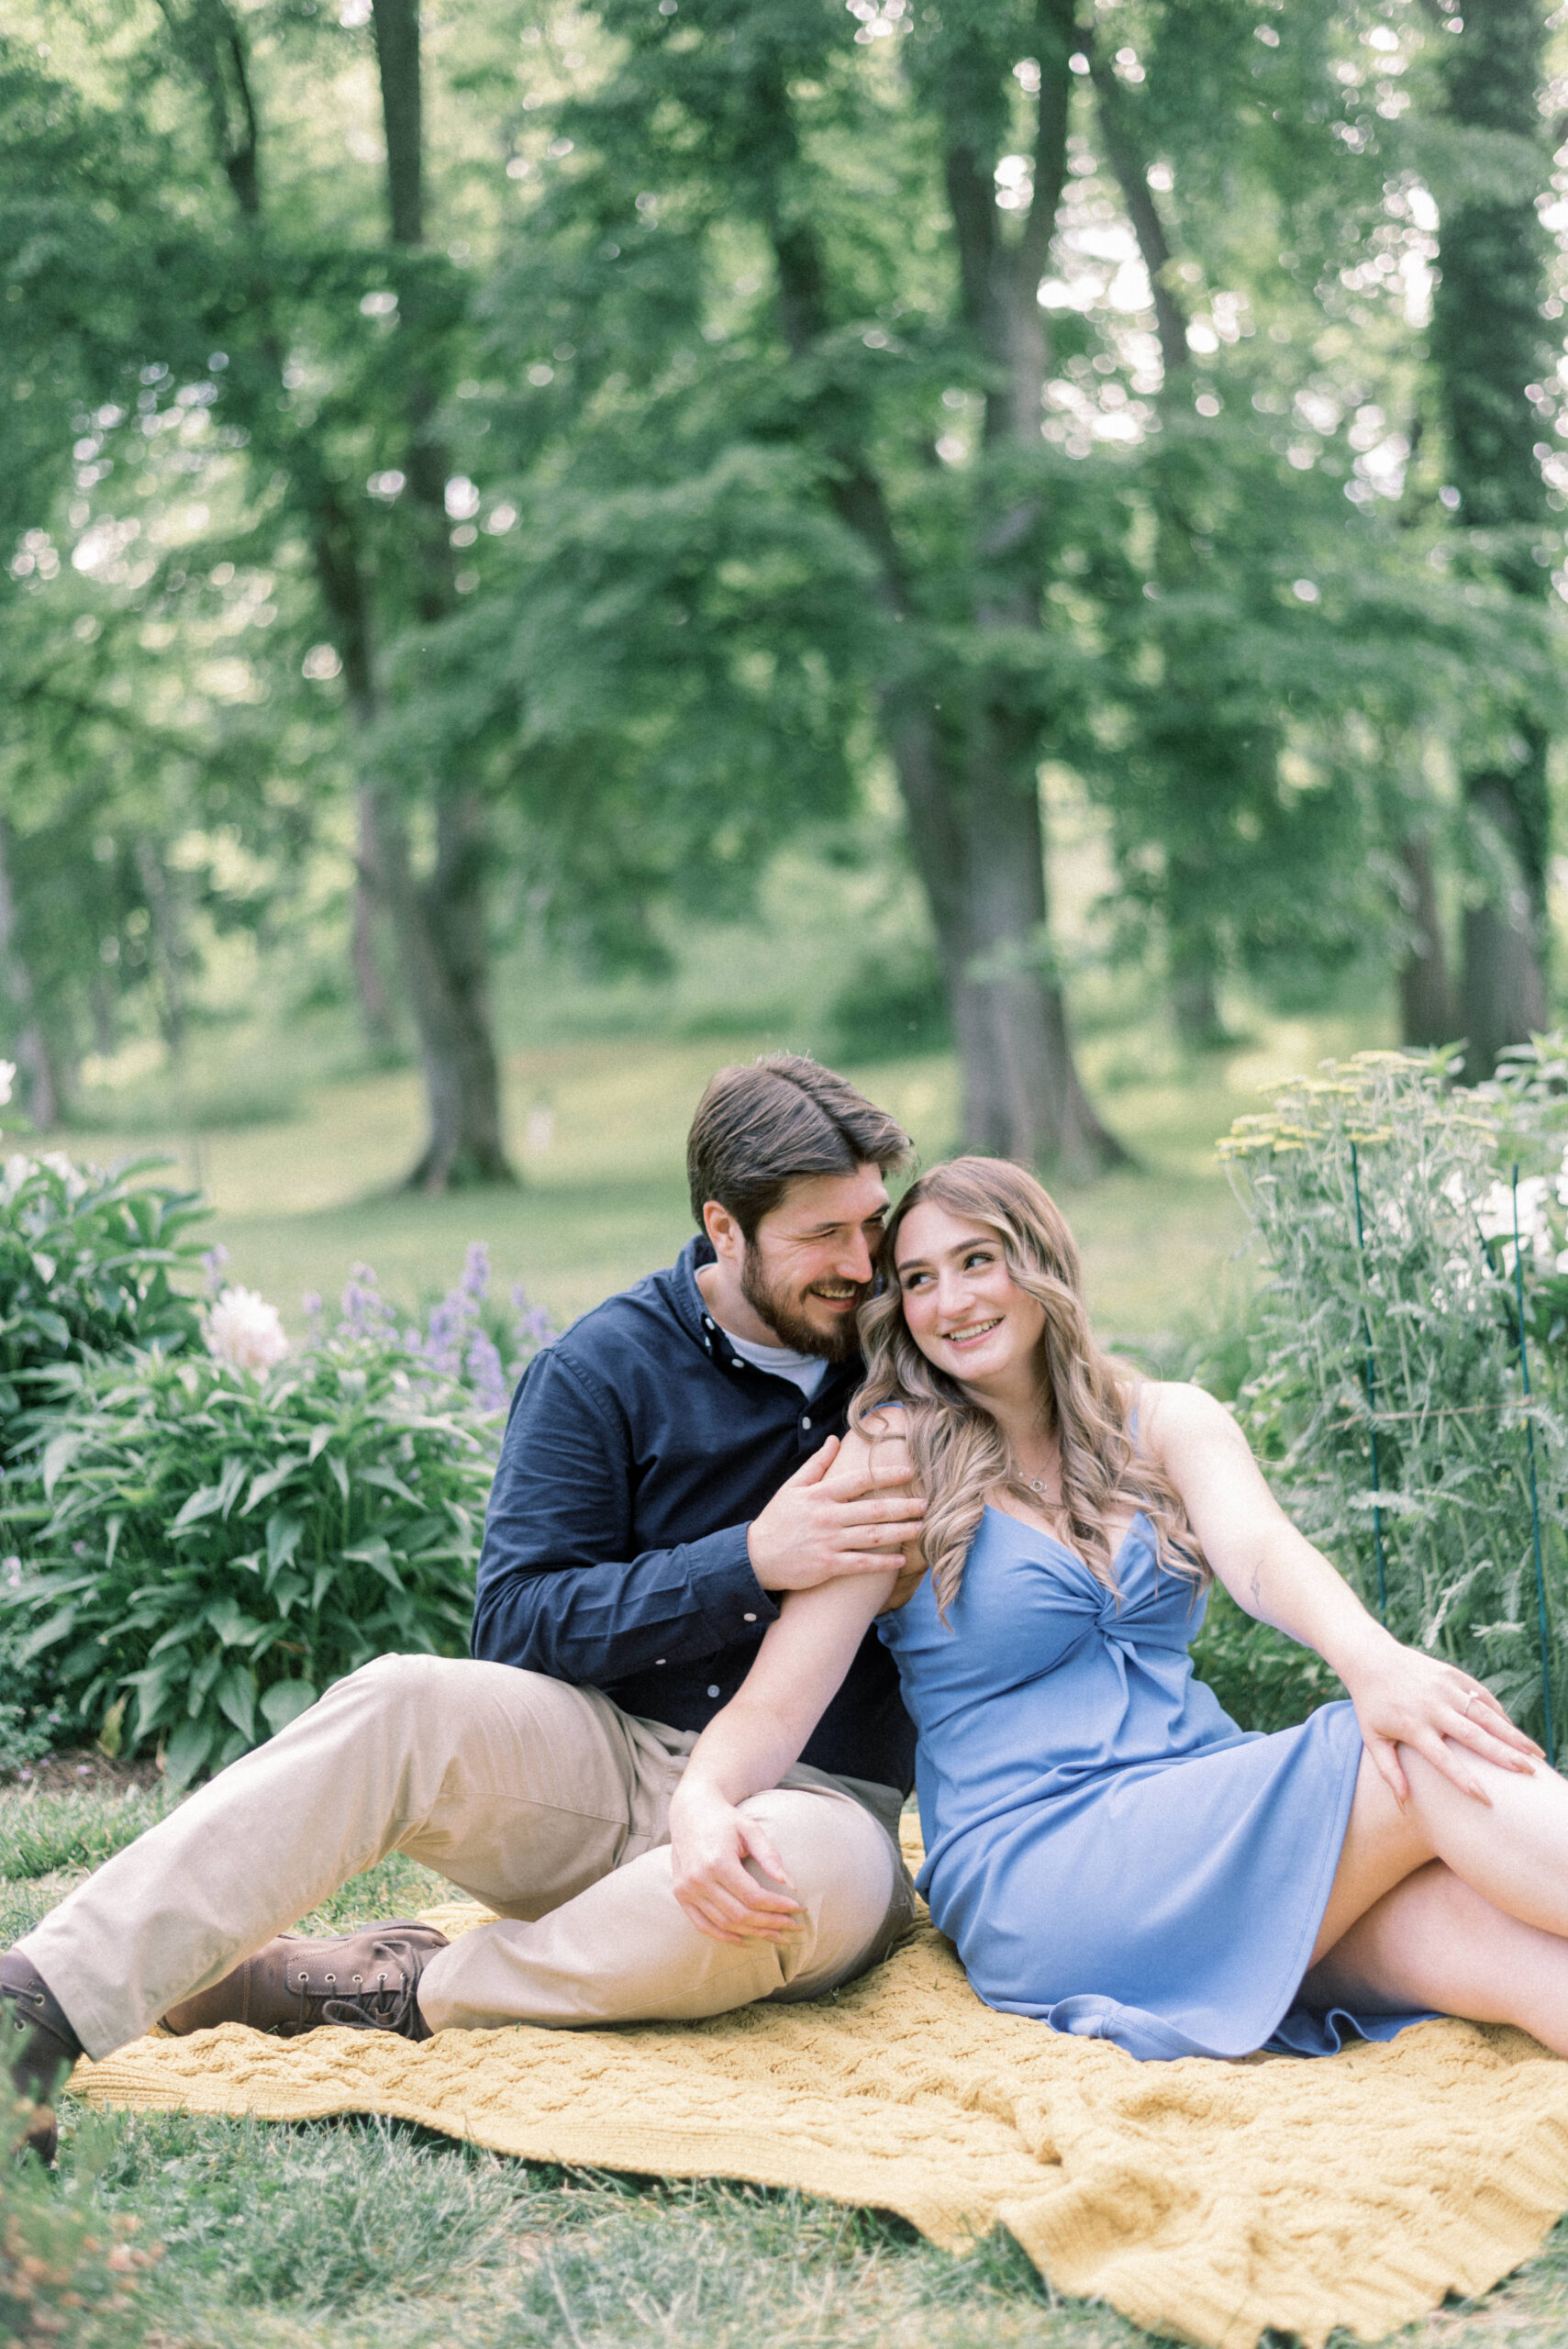 Maryland wedding photographer captures man and woman sitting on blanket during engagement portraits